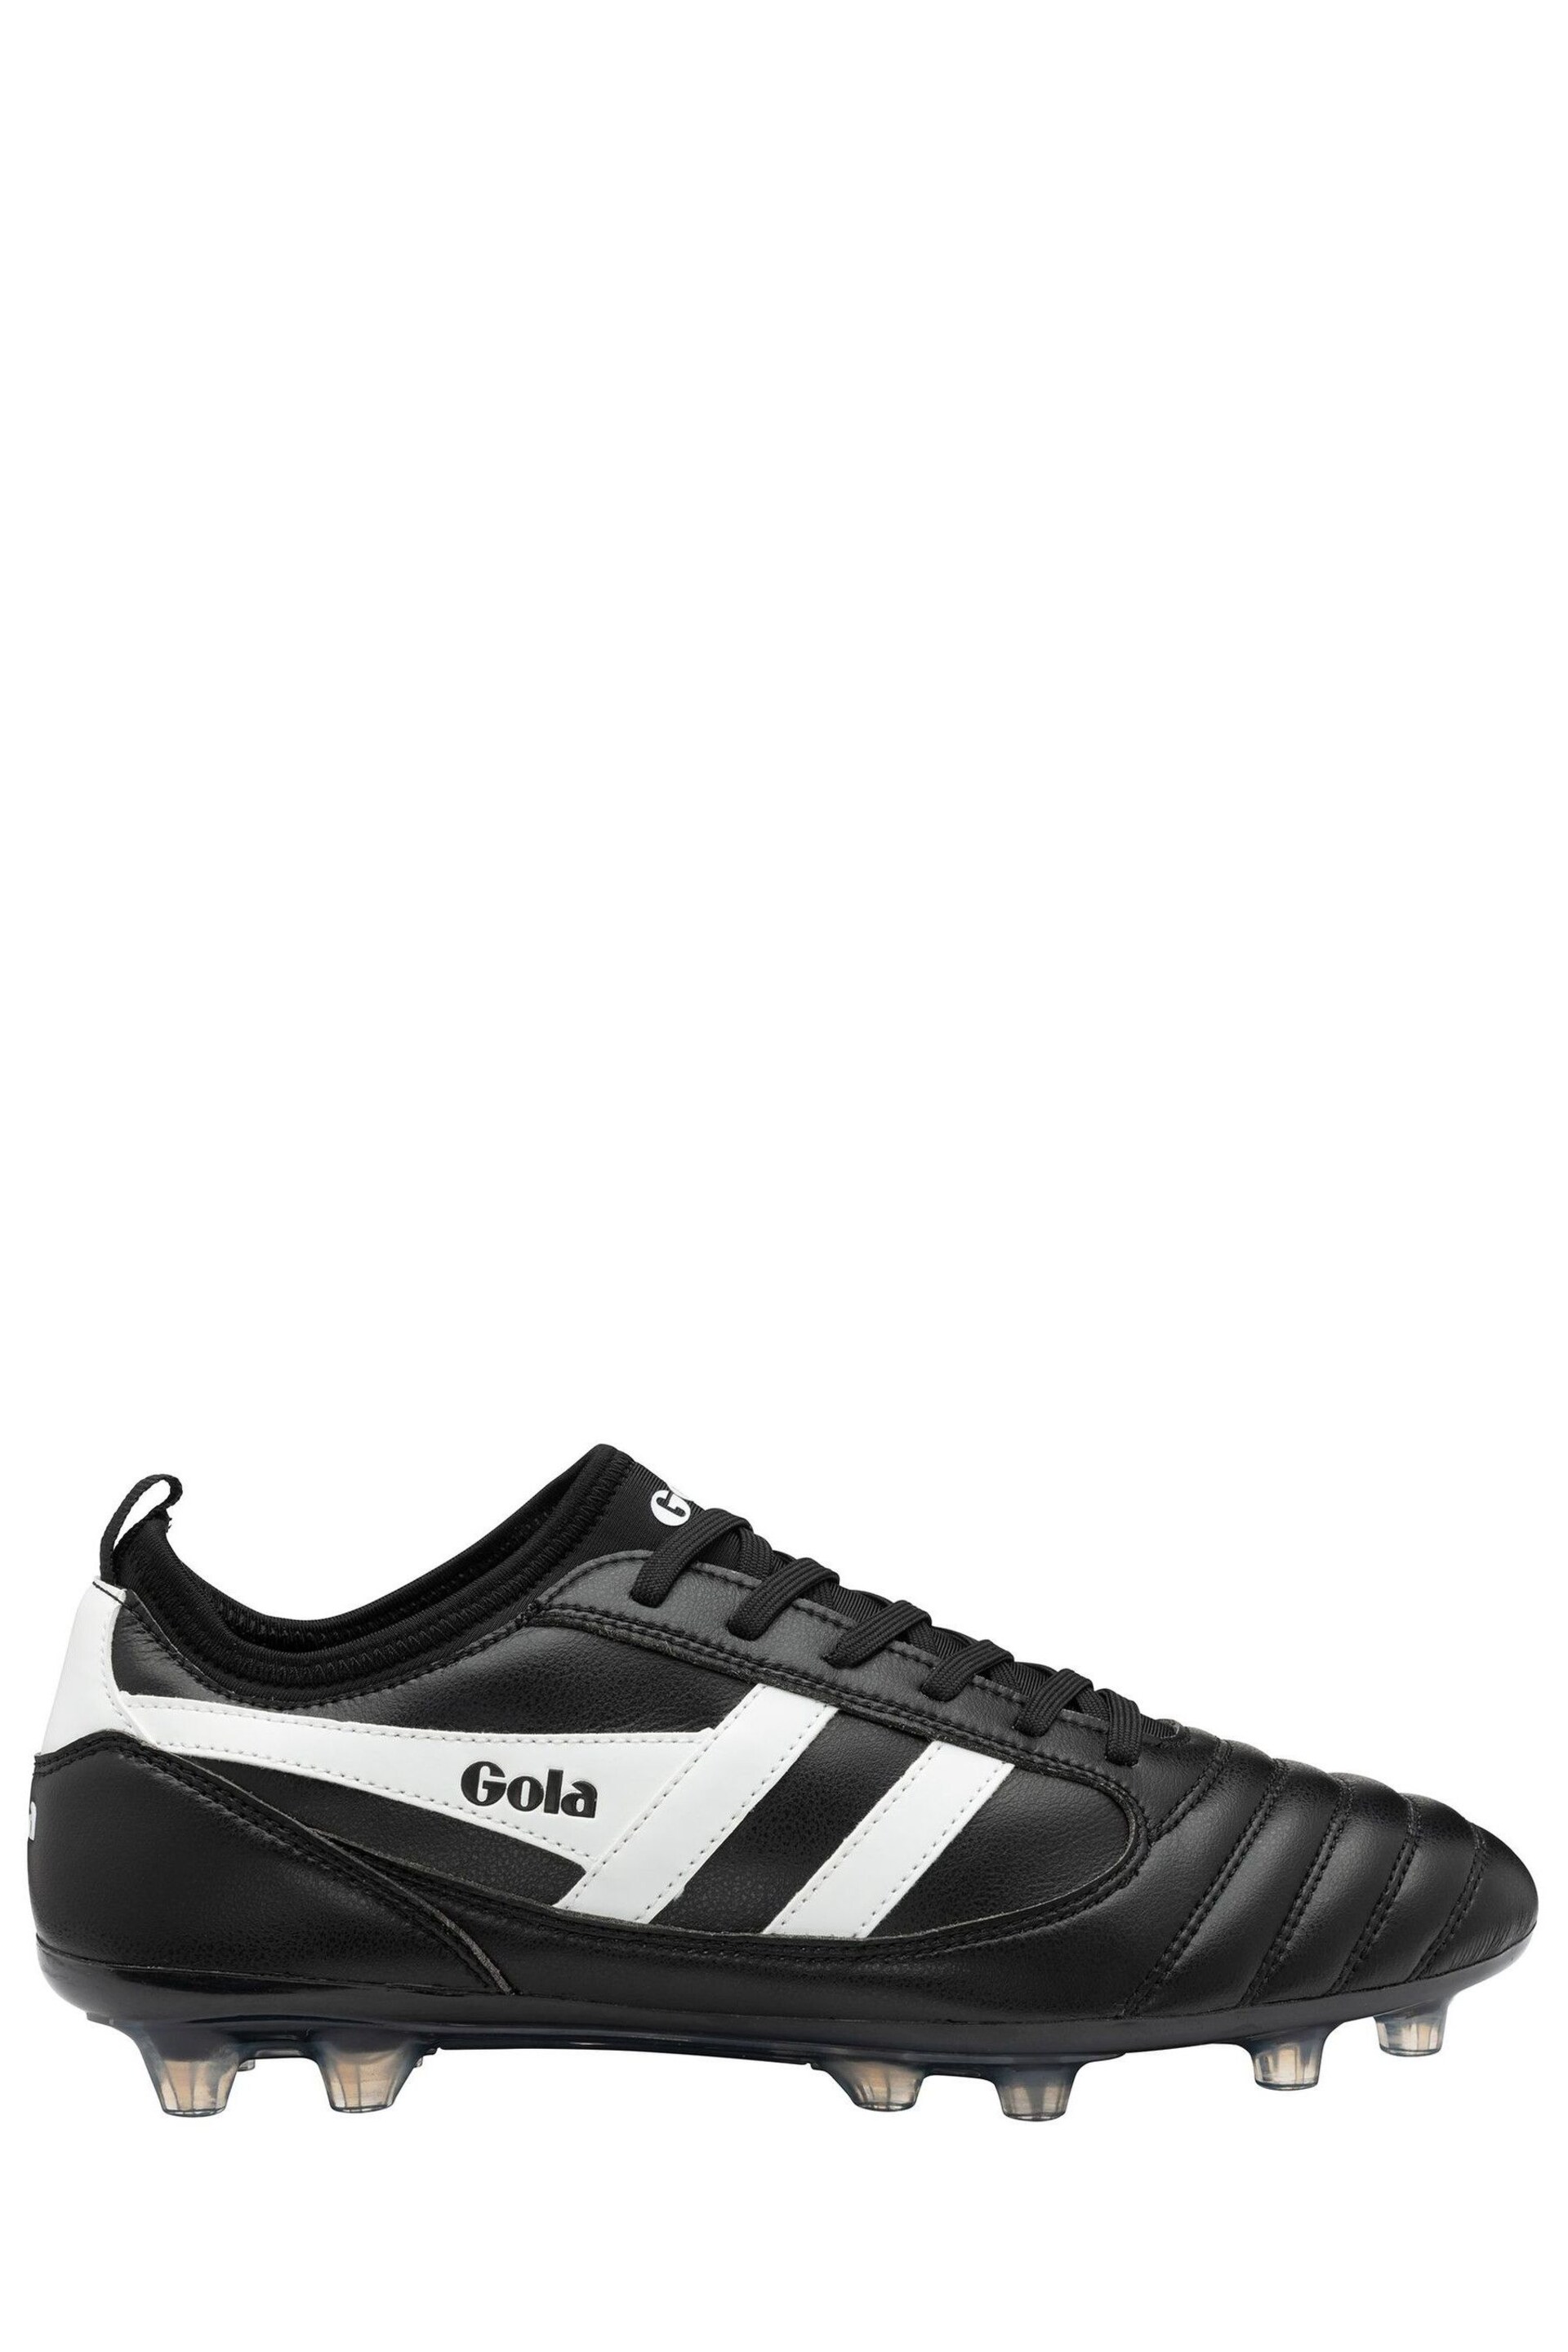 Gola Black/White Mens Ceptor MLD Pro Microfibre Lace-Up Football Boots - Image 1 of 5